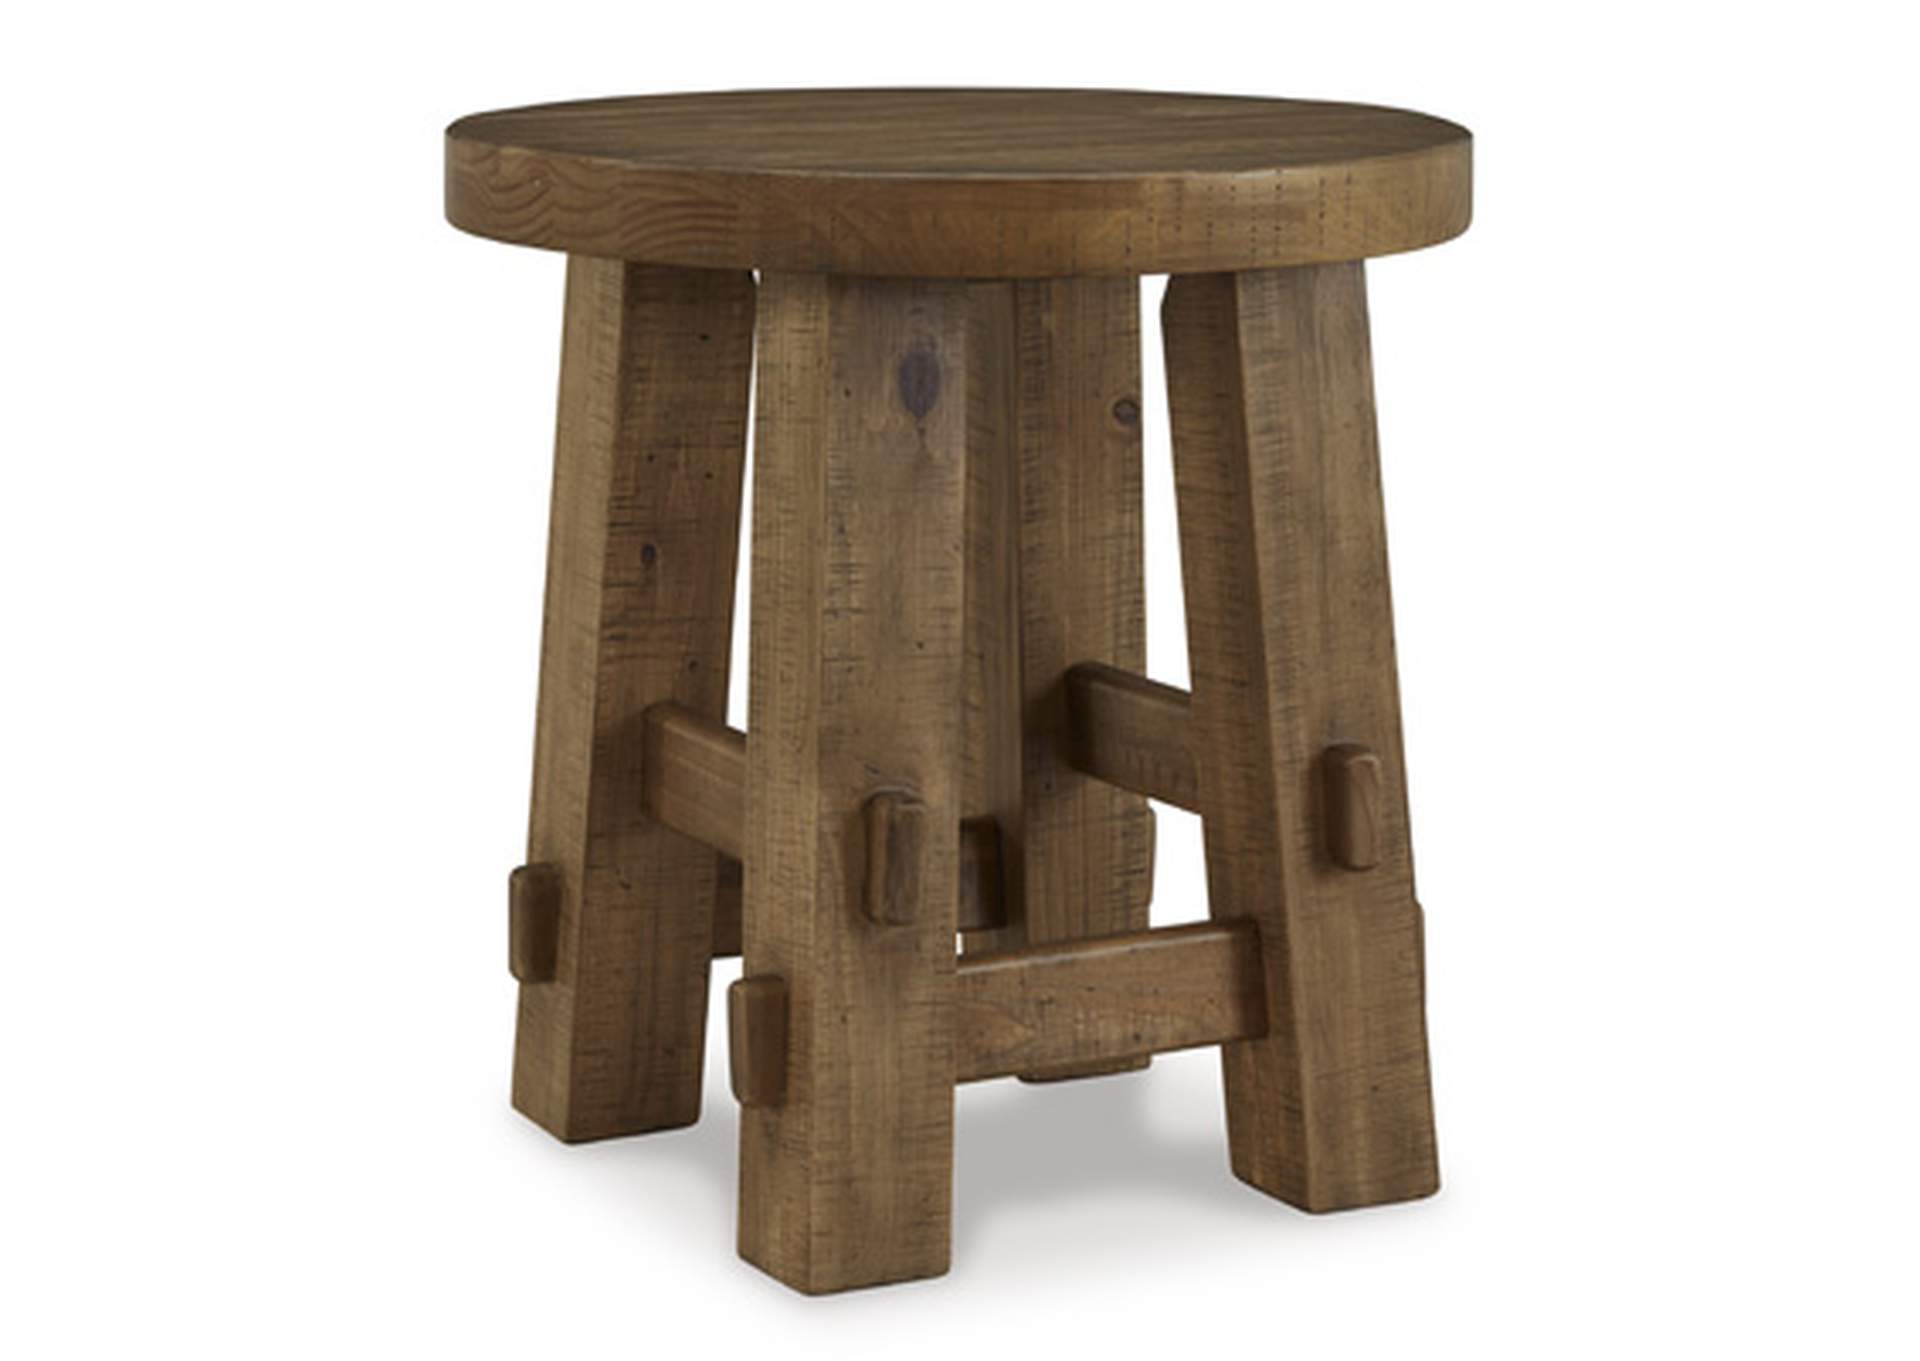 Mackifeld End Table,Signature Design By Ashley